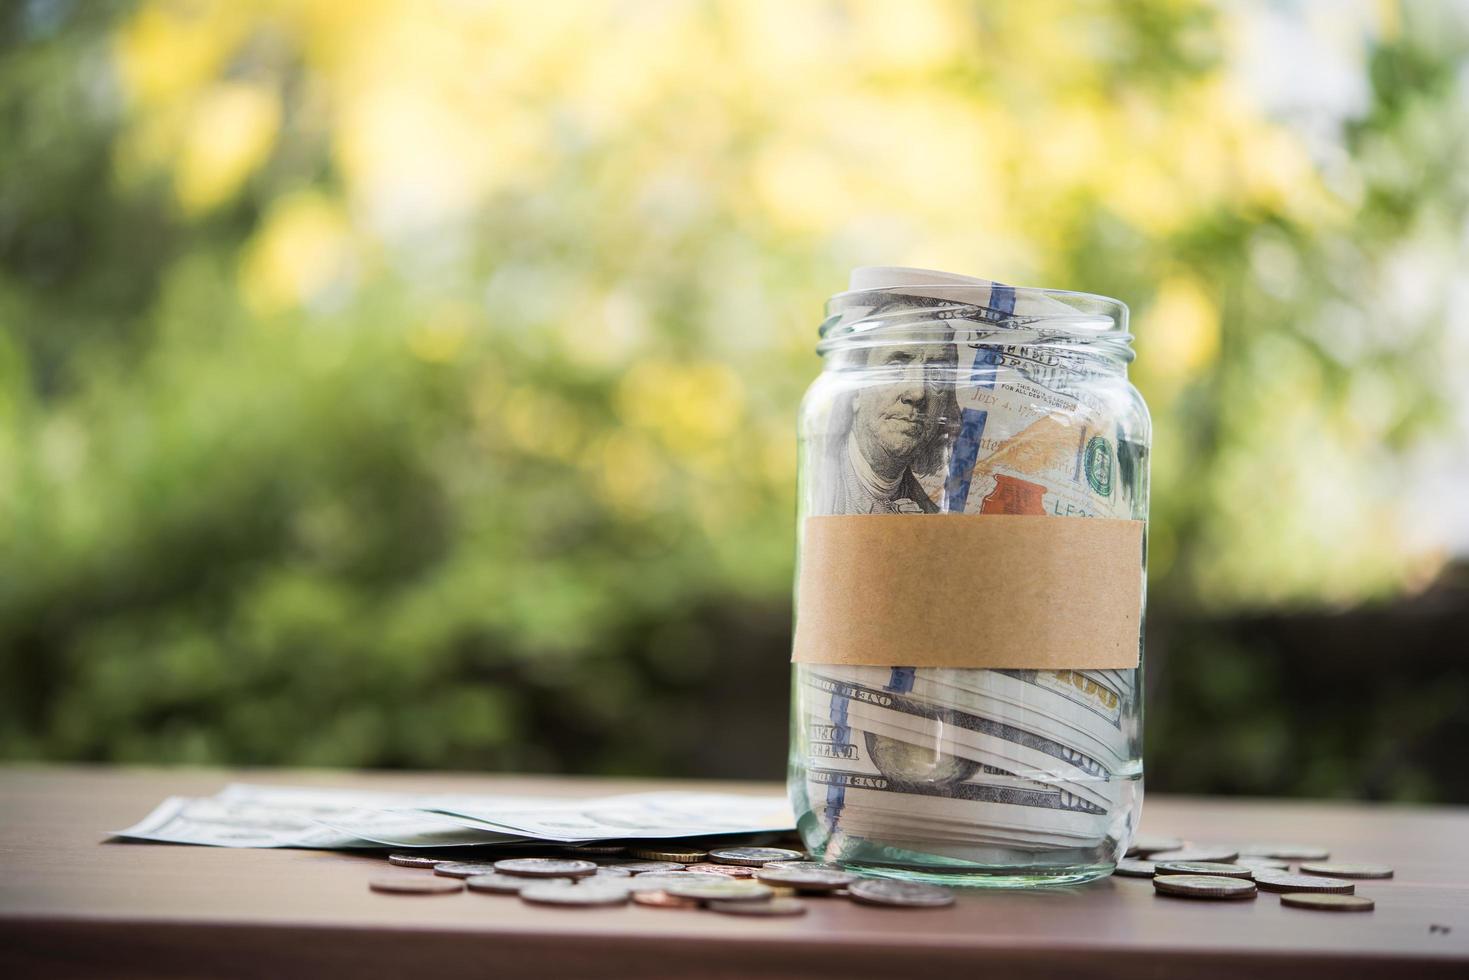 Money in a glass jar in nature, investment concept photo